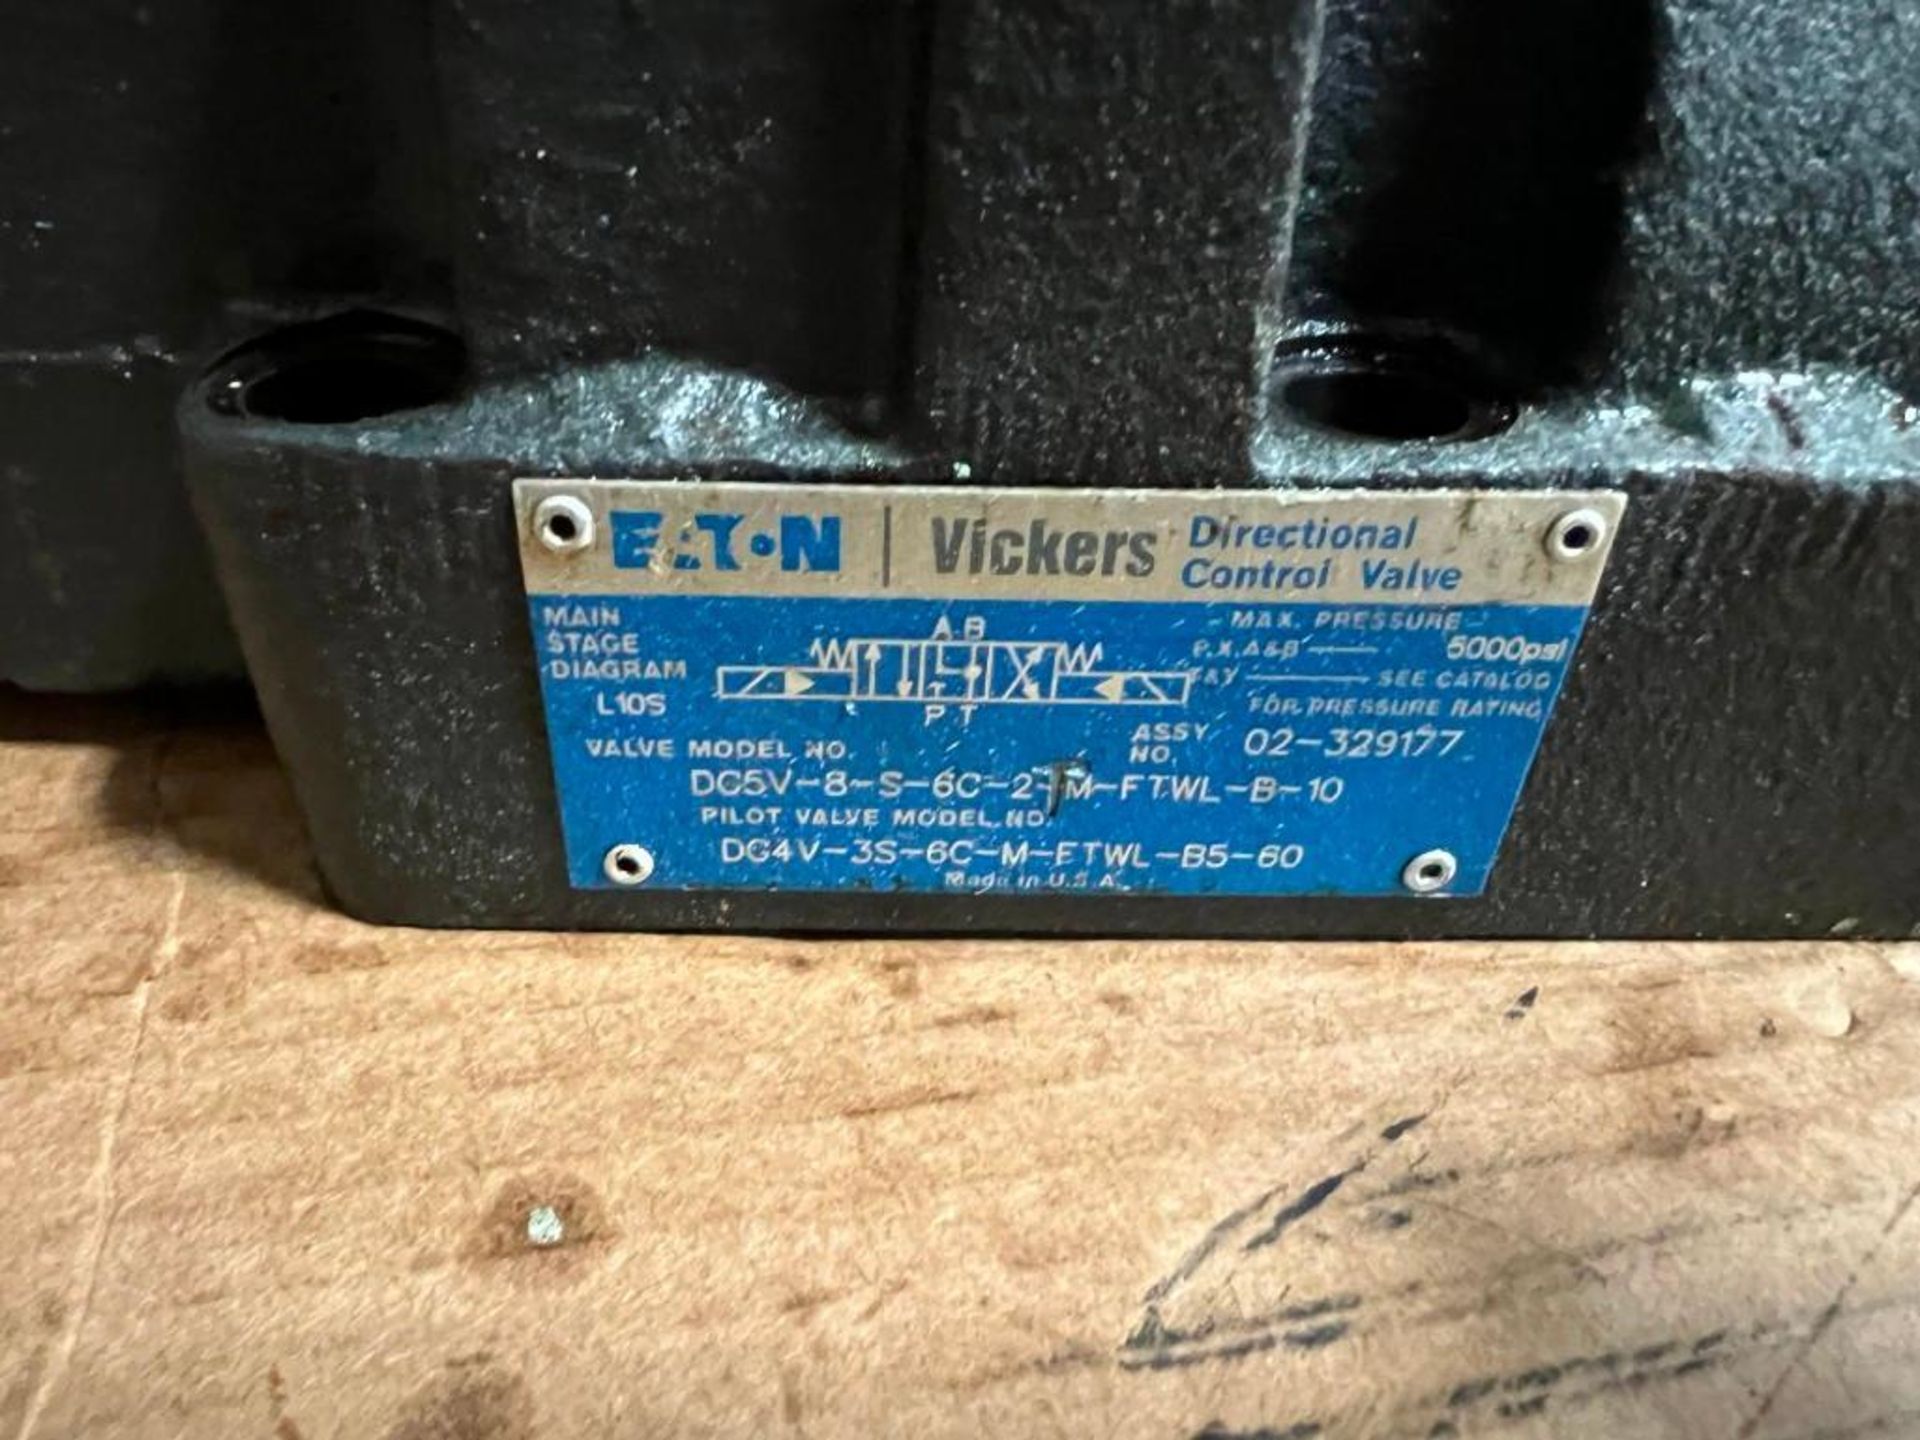 Vickers Directional Control Valve - Image 2 of 3